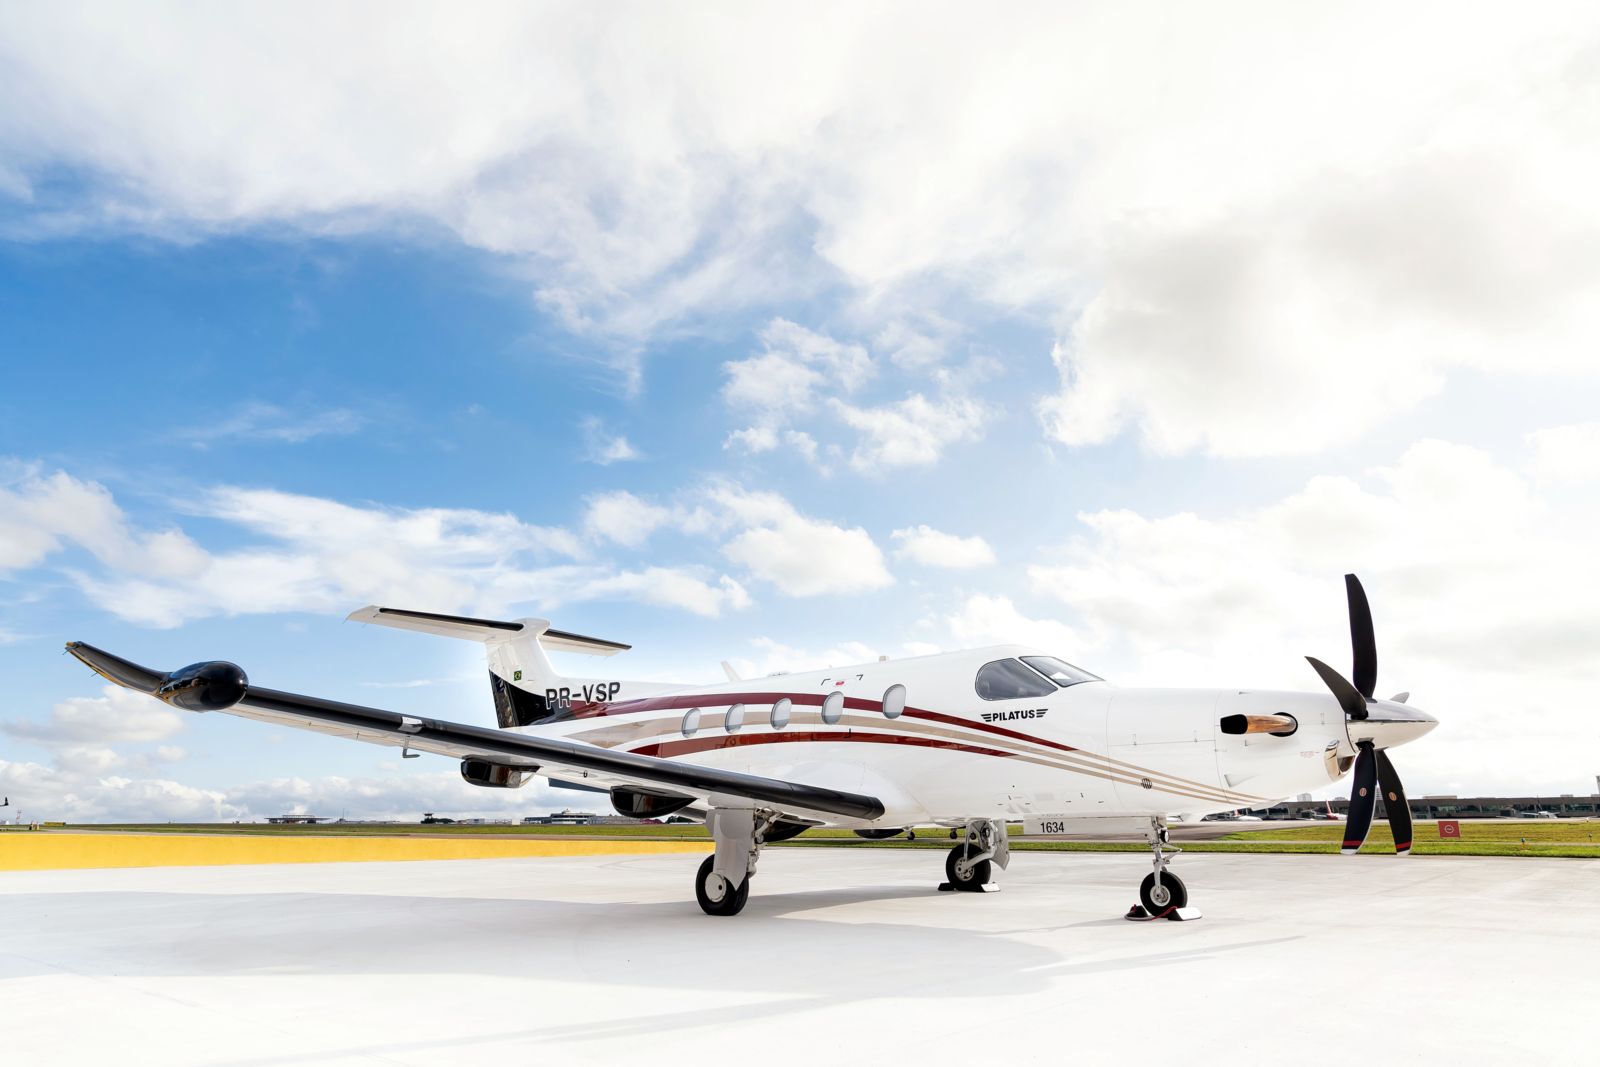 Pilatus PC-12 NG S/N 1634 for sale | feature image